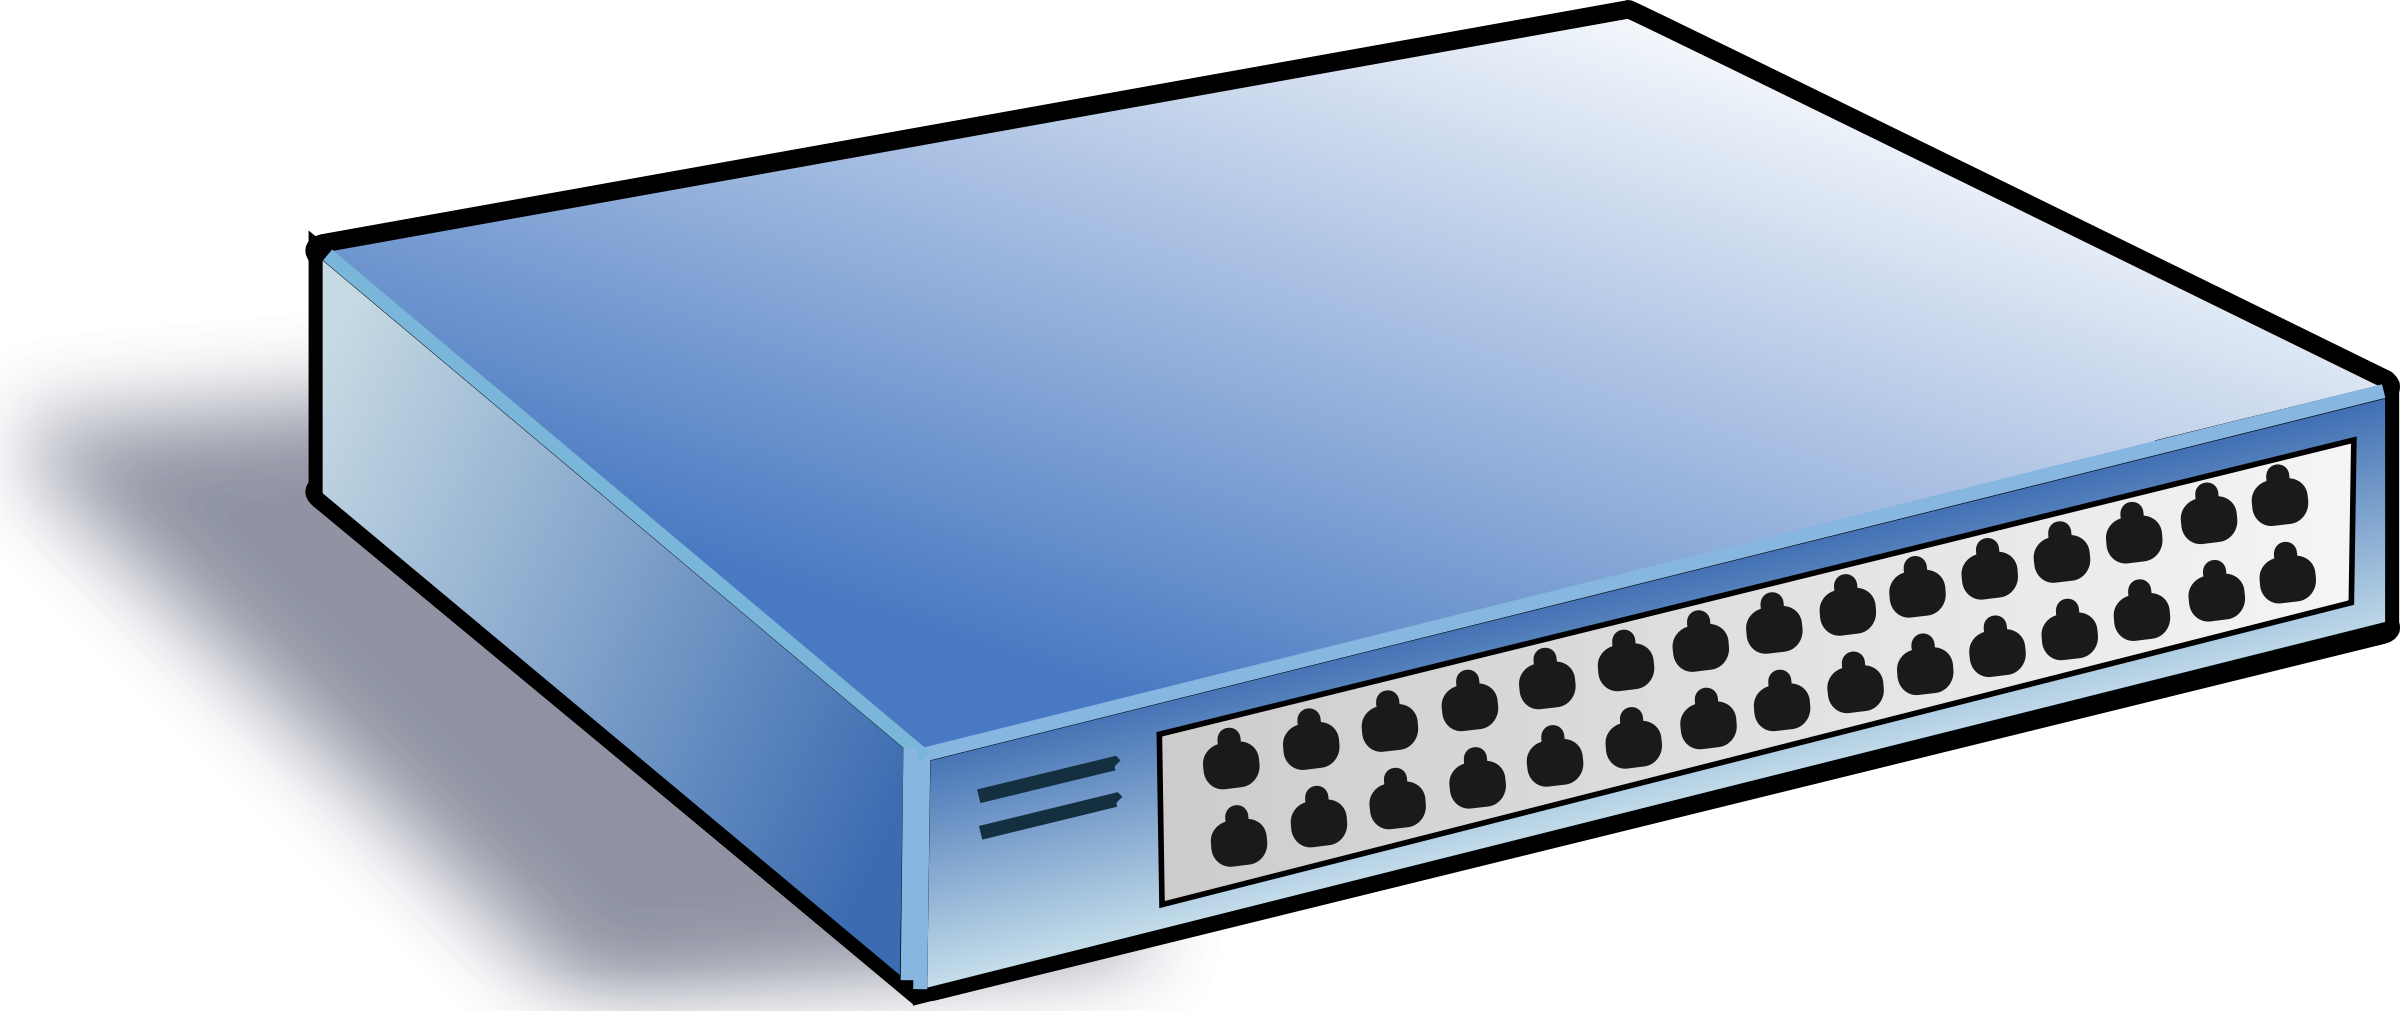 Cisco Switch Png - Viewing Gallery